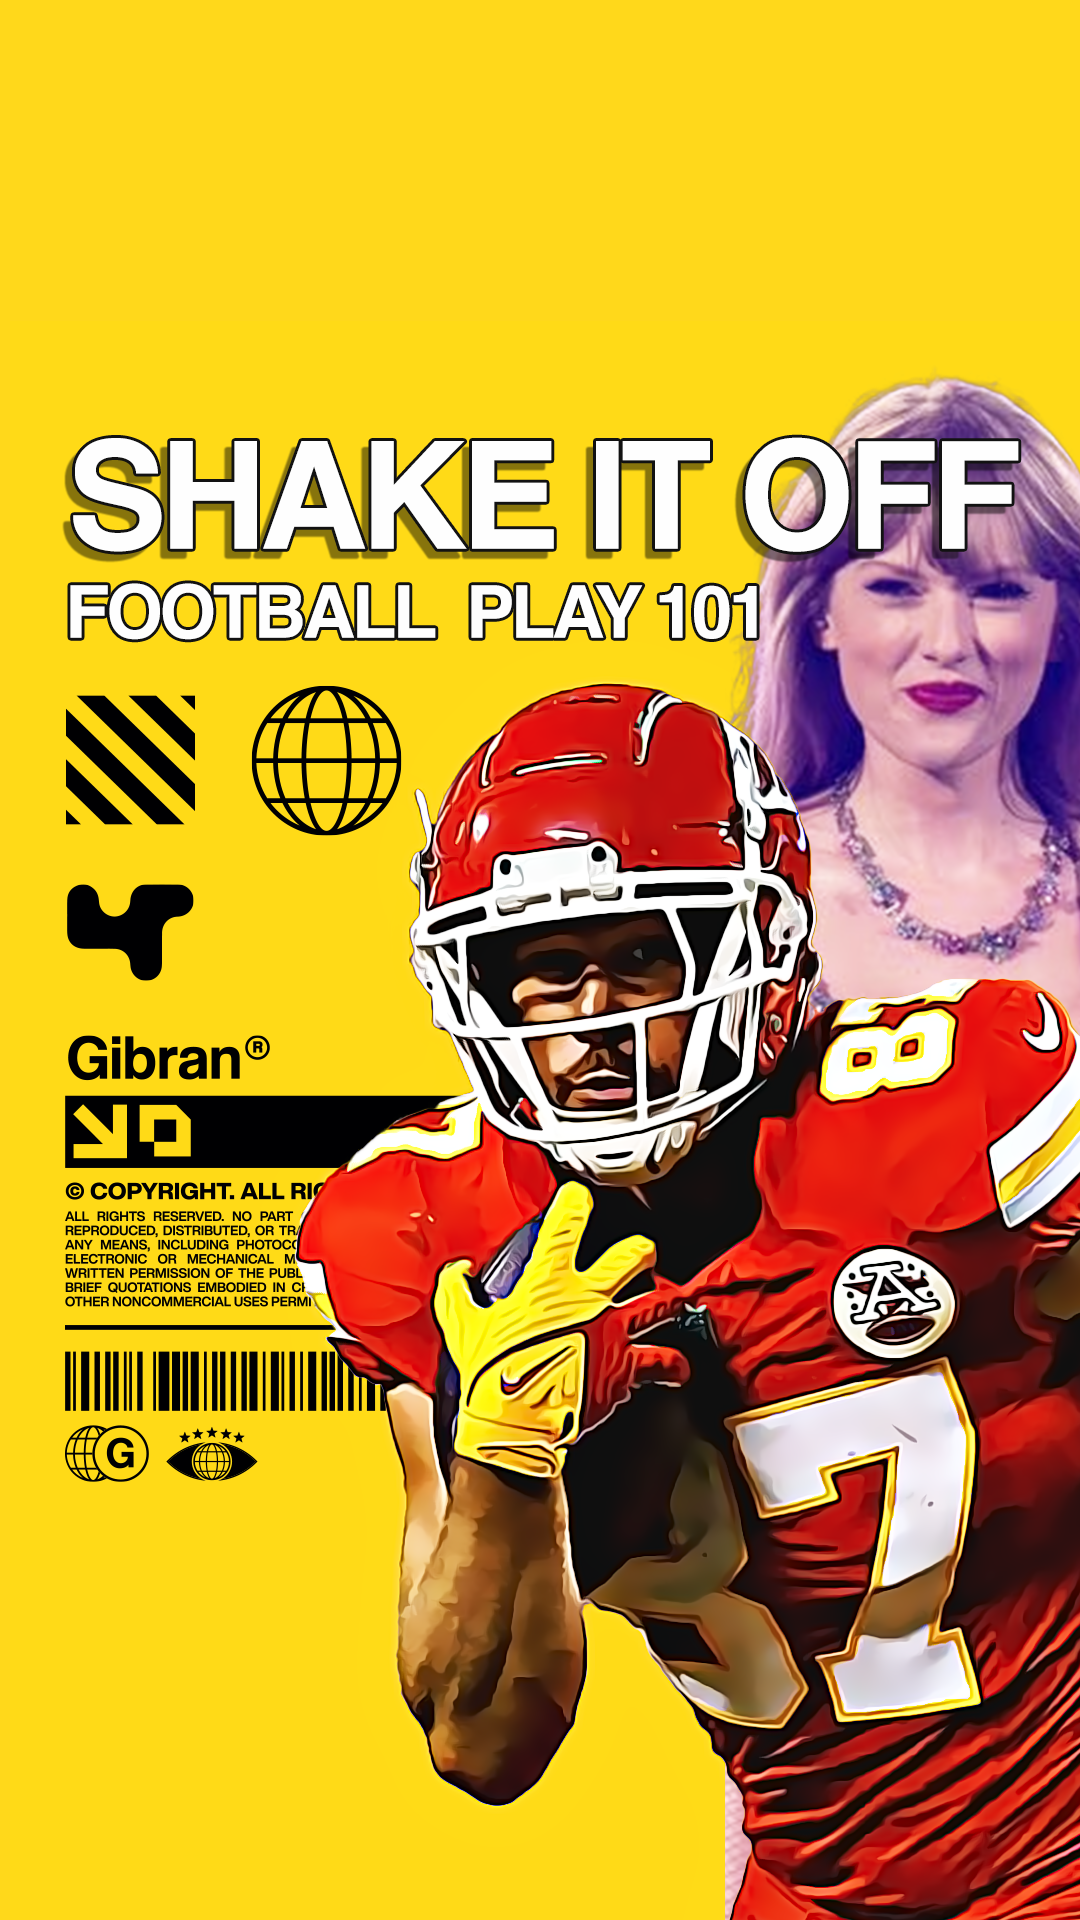 Shake it Off, Travis Kelce and the Kansas City Chiefs